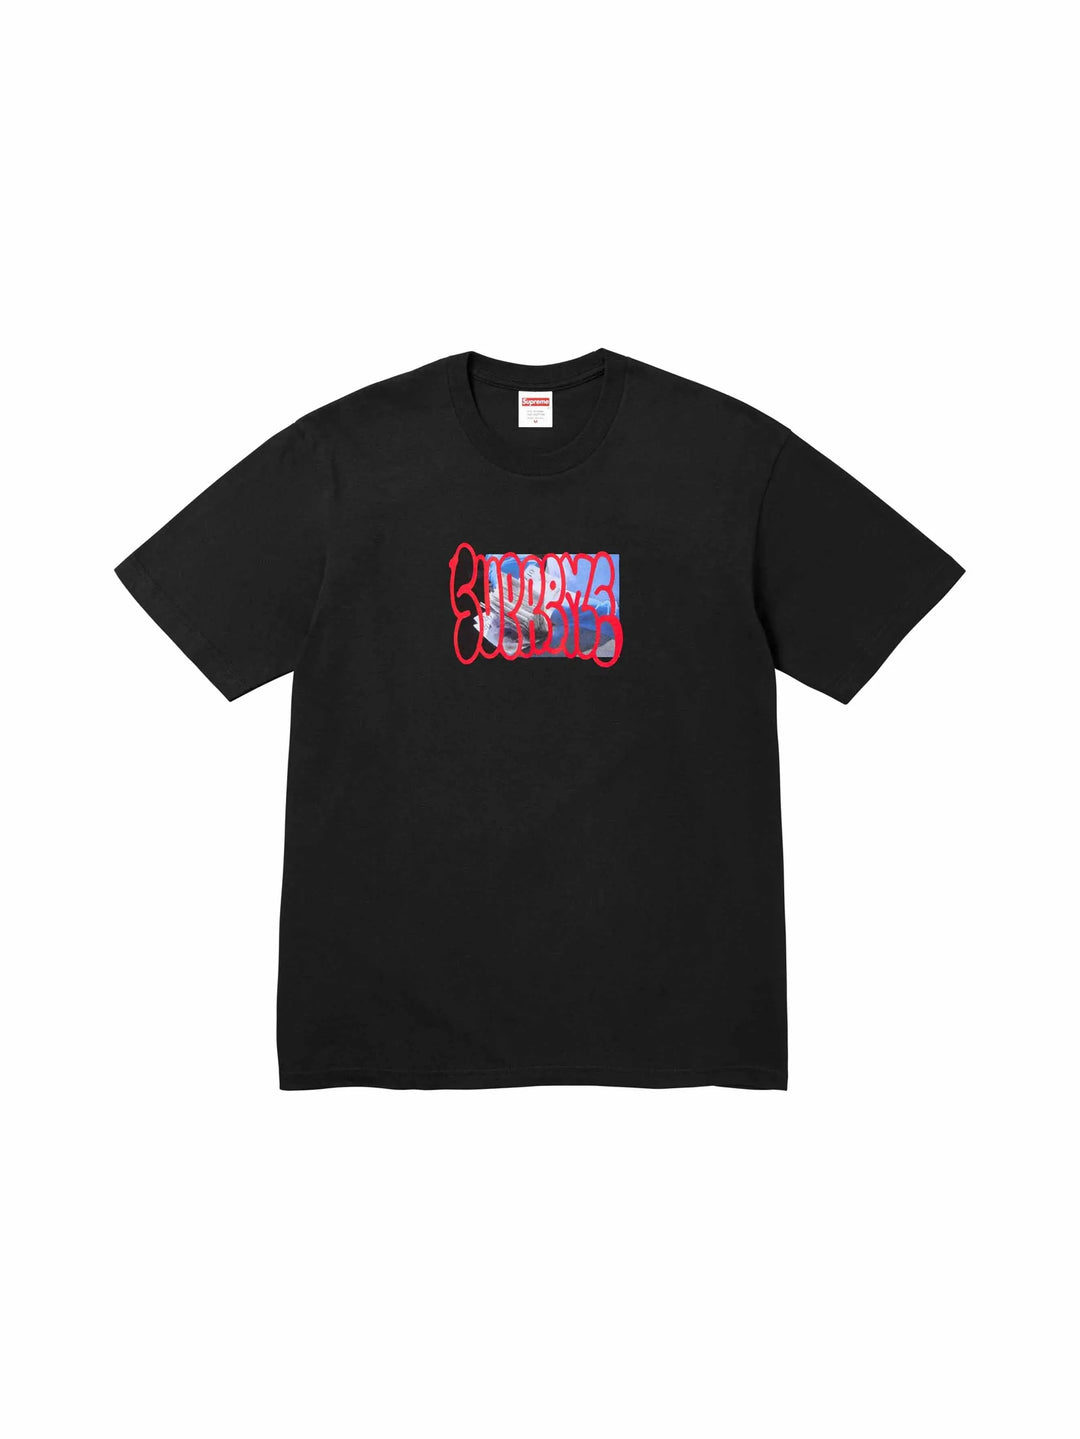 Supreme Payment Tee Black in Auckland, New Zealand - Shop name